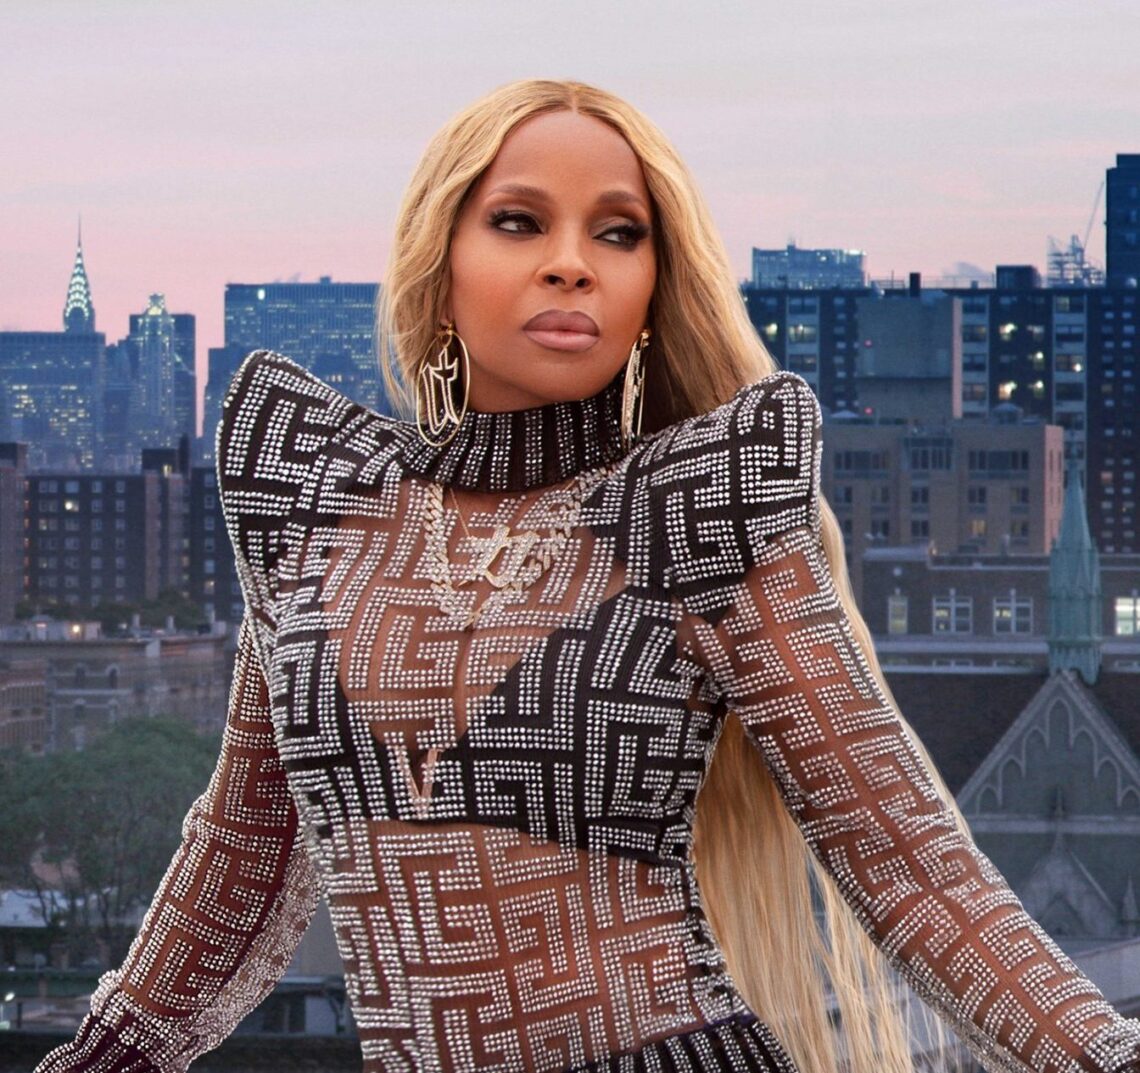 Mary J Blige: Latest News, Pictures & Videos - HELLO!